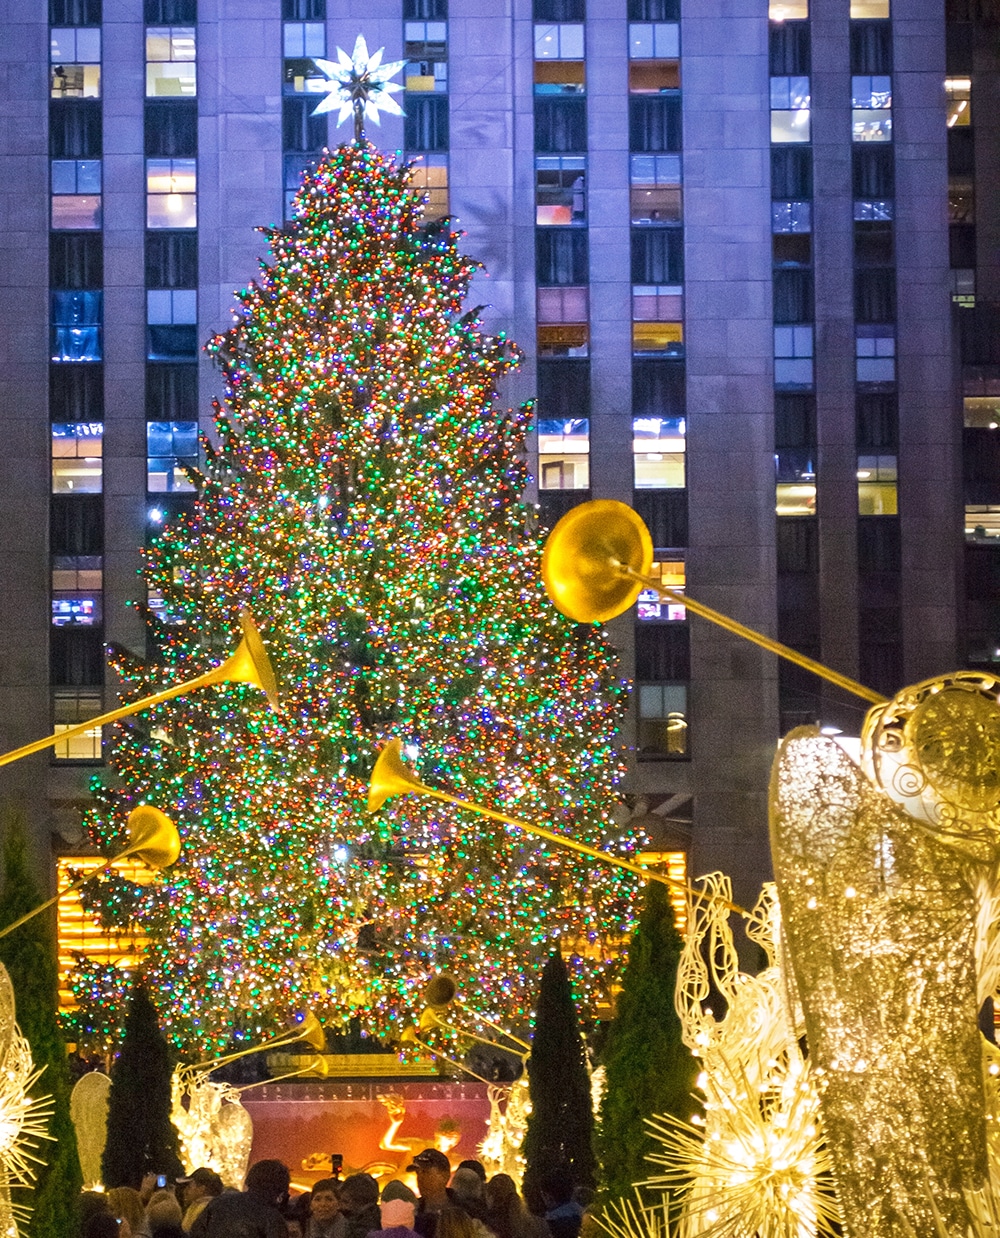 UNITED STATES - DECEMBER 24: Christmas tree in Rockefeller Plaza. (Photo by MCNY/Gottscho-Schleisner/Getty Images)